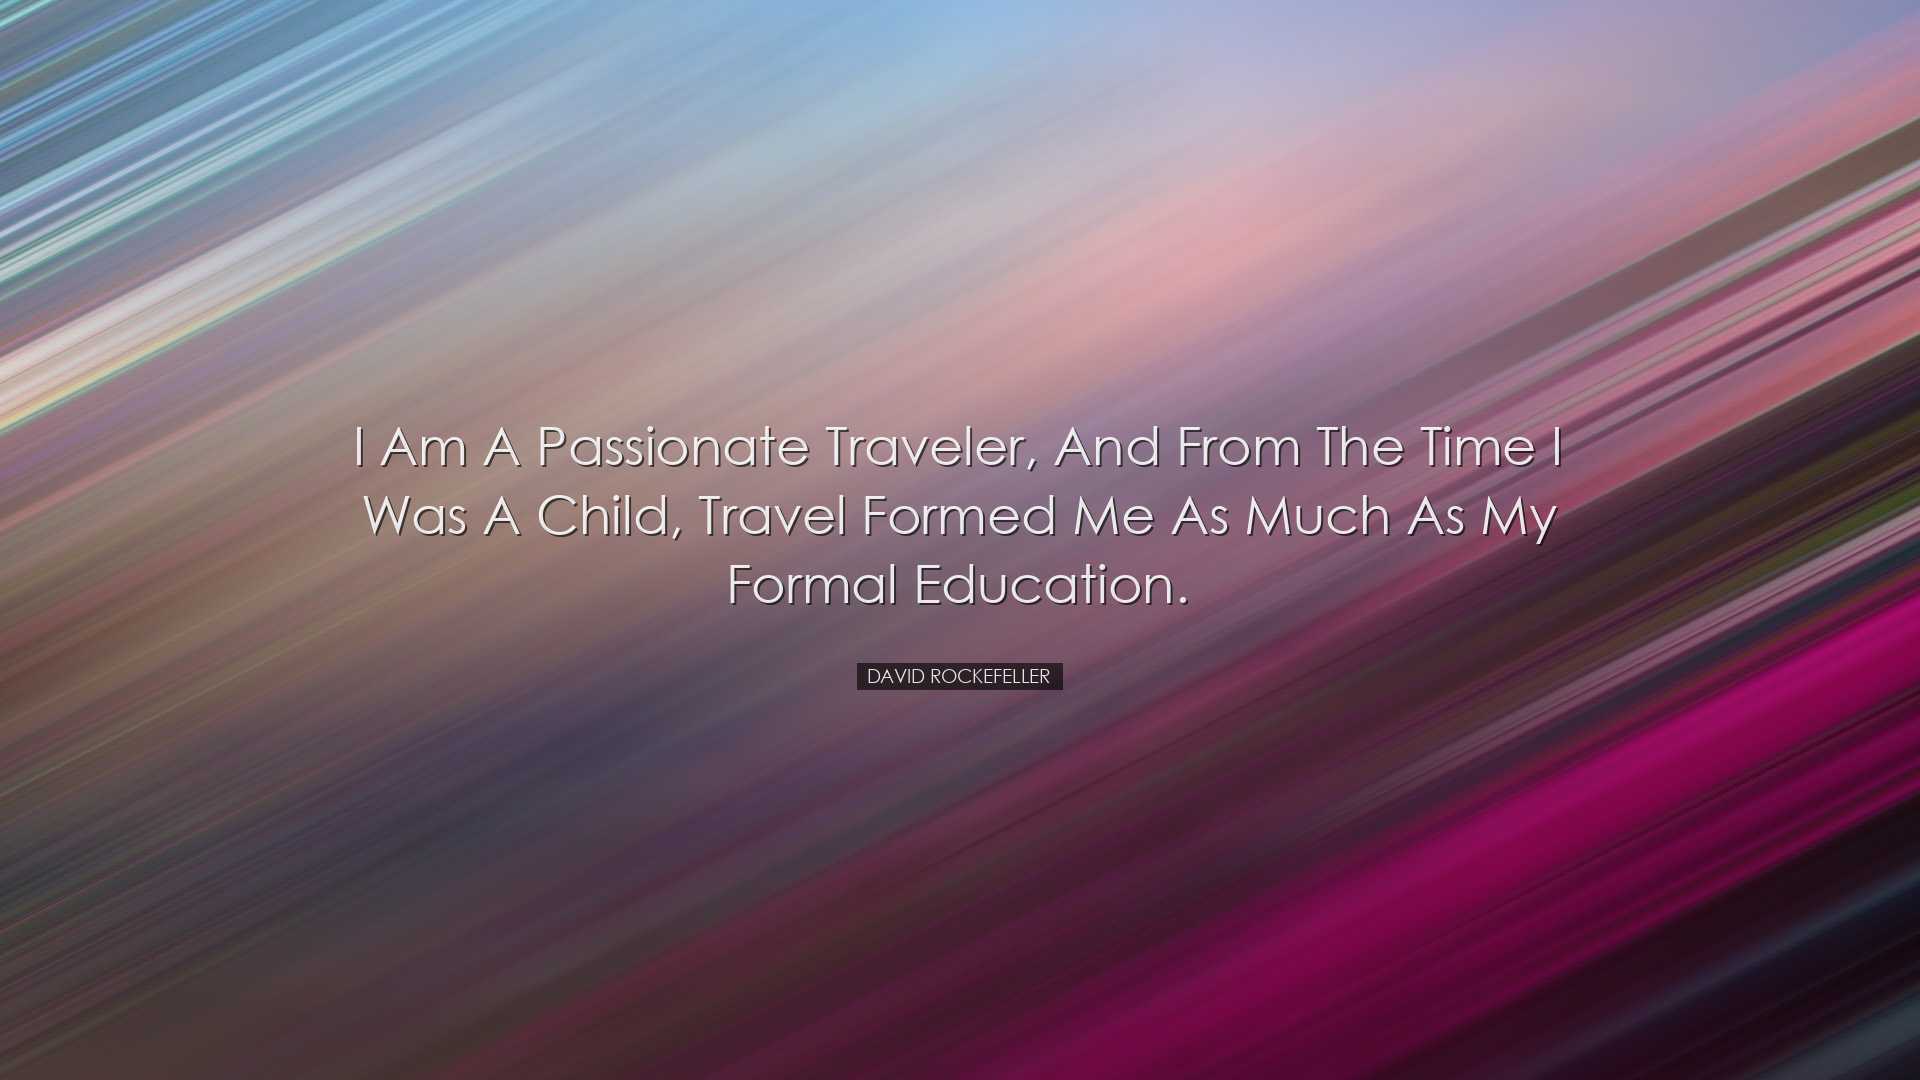 I am a passionate traveler, and from the time I was a child, trave